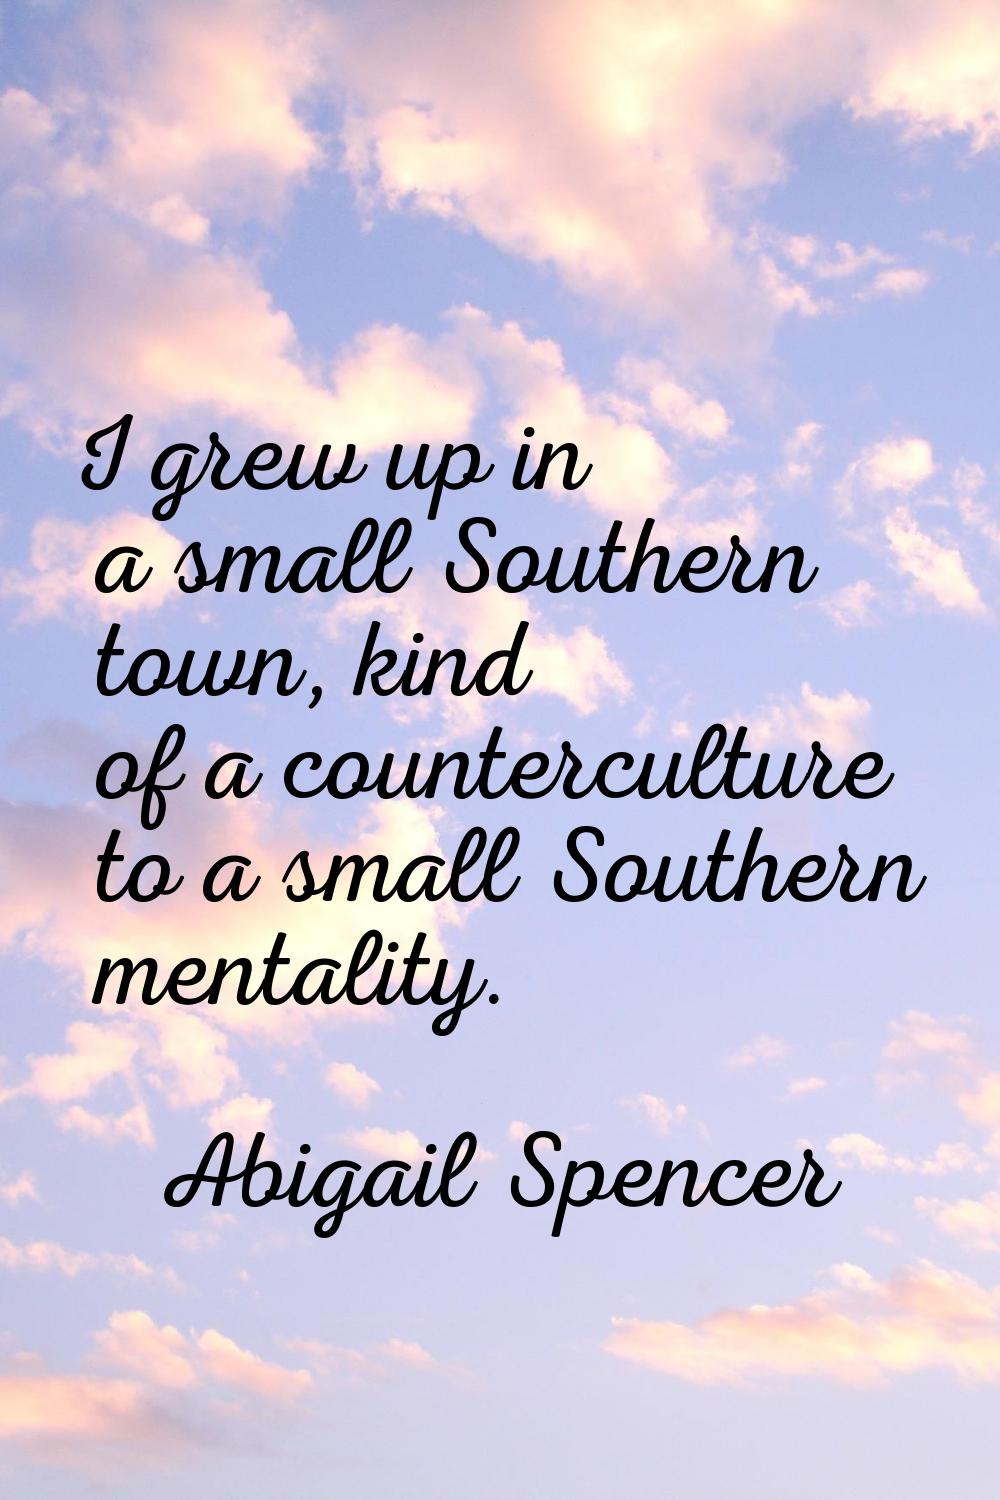 I grew up in a small Southern town, kind of a counterculture to a small Southern mentality.